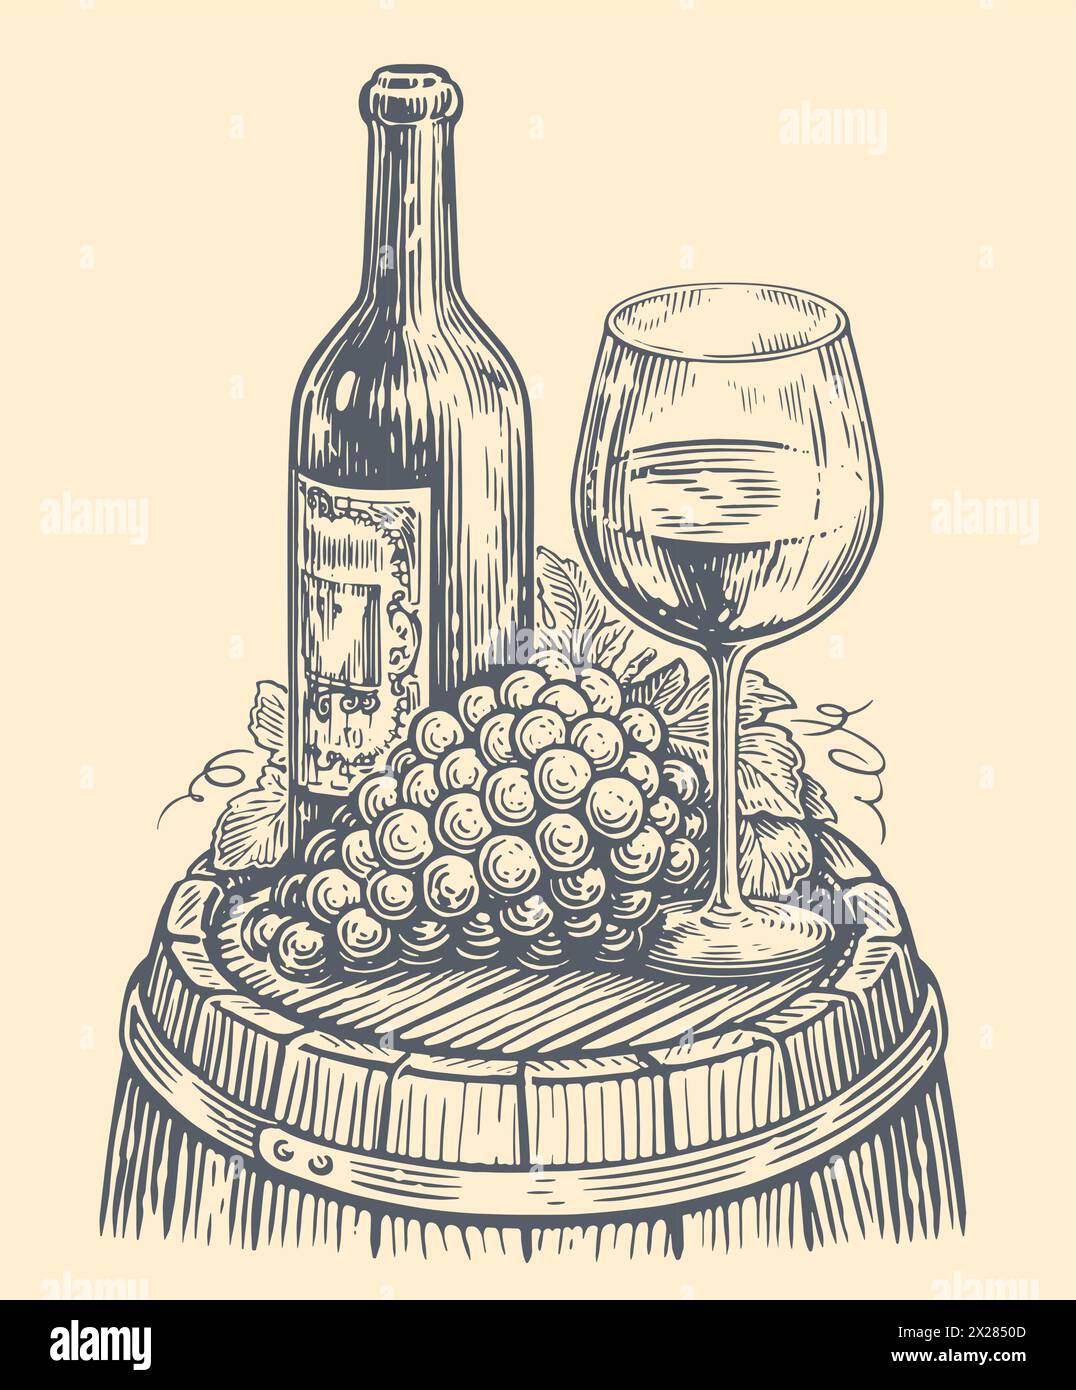 Bottle of wine with glass of wine bunch of grapes. Sketch vintage vector illustration. Winery, vineyard Stock Vector